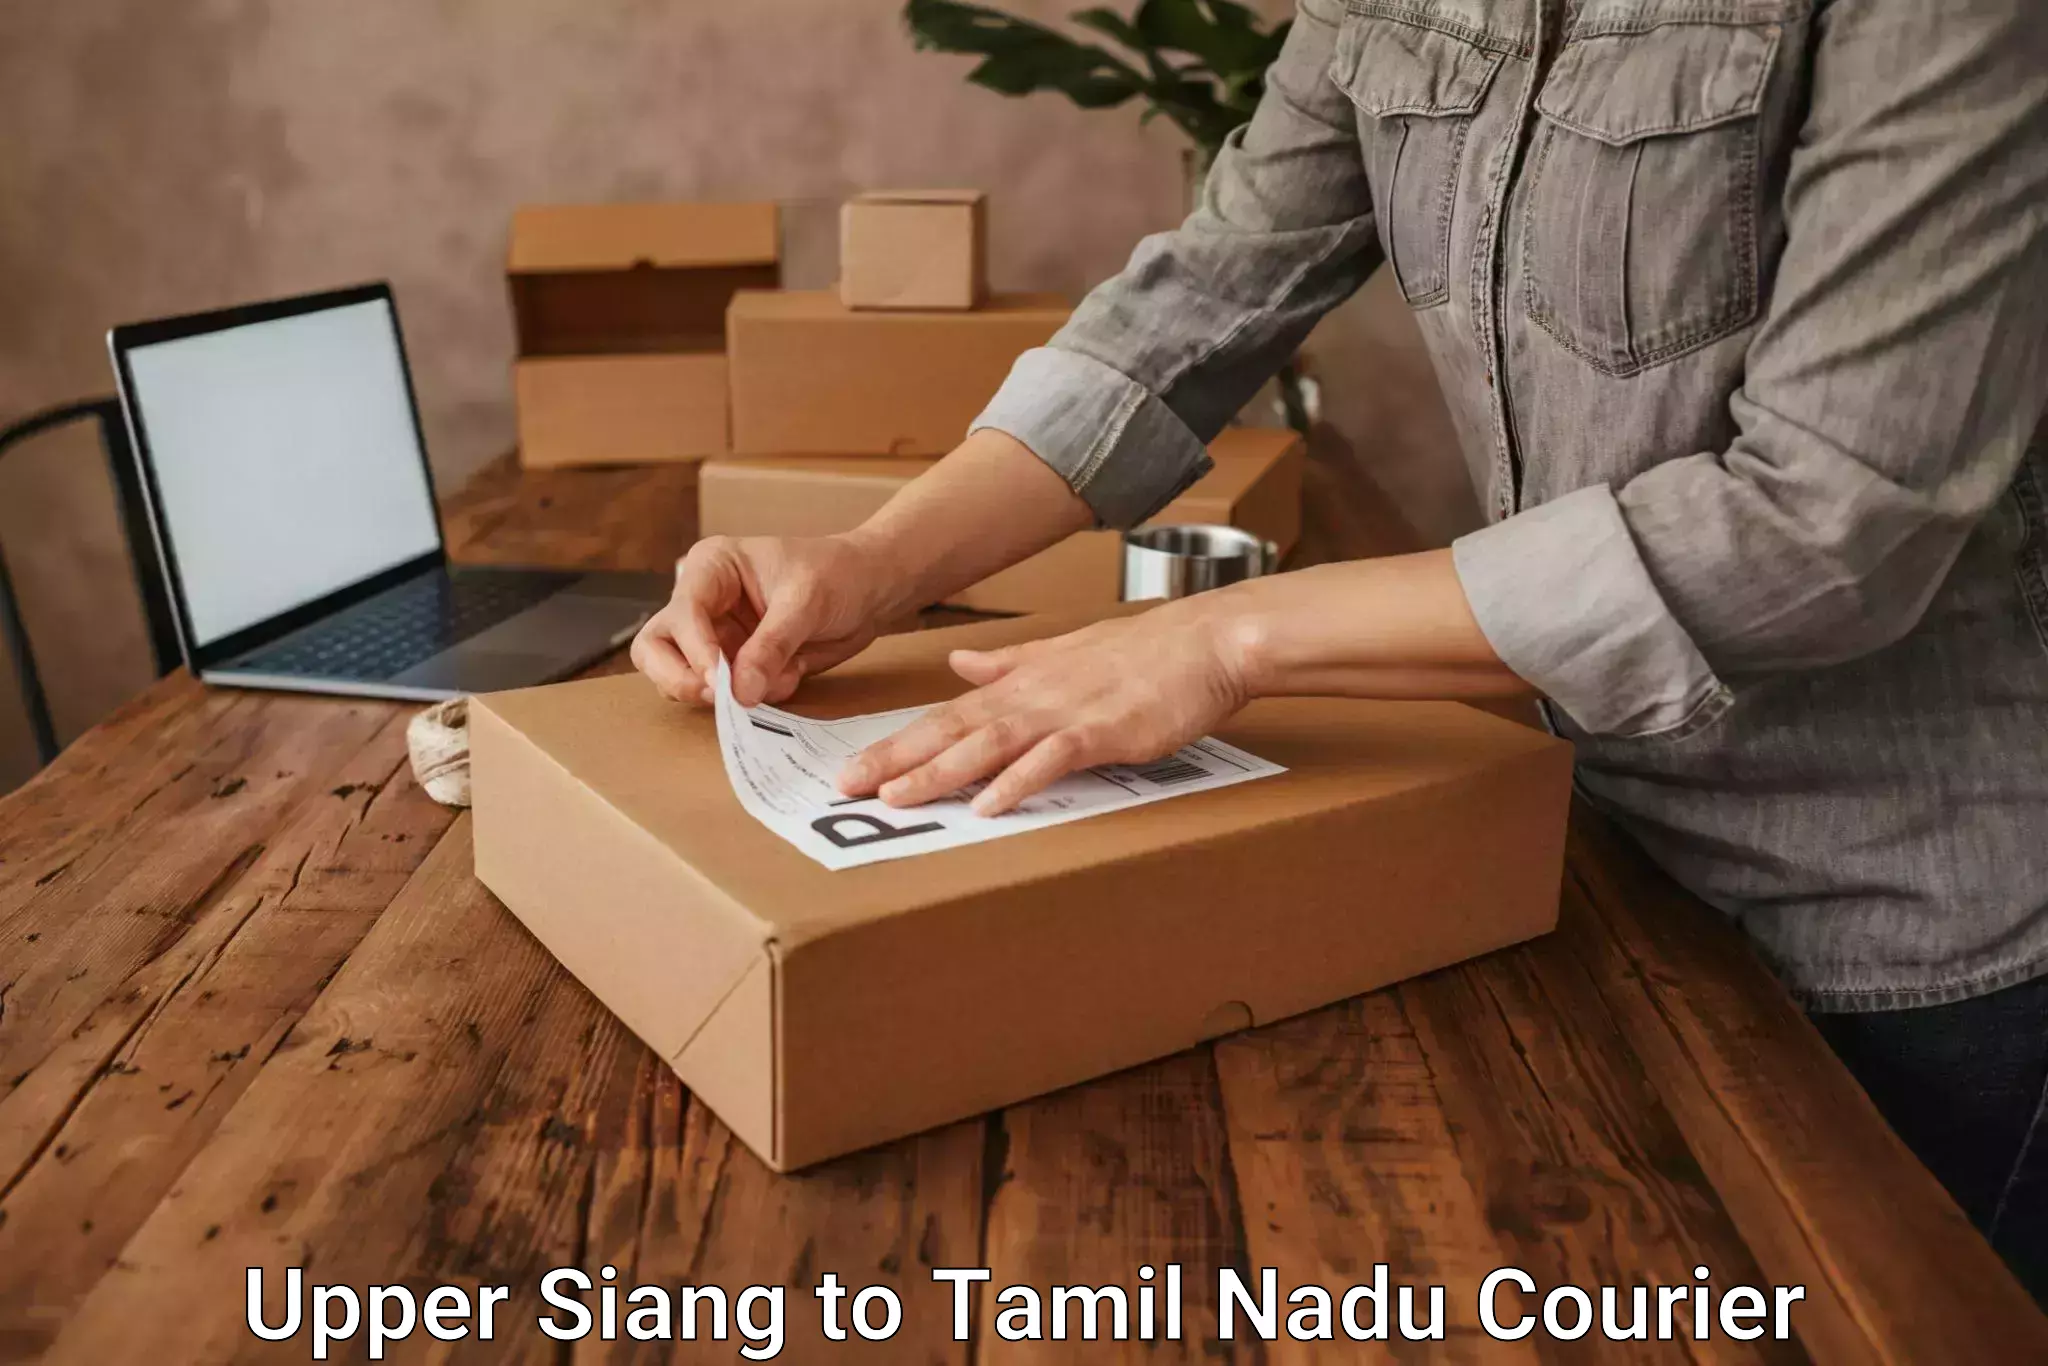 Courier app Upper Siang to Coimbatore